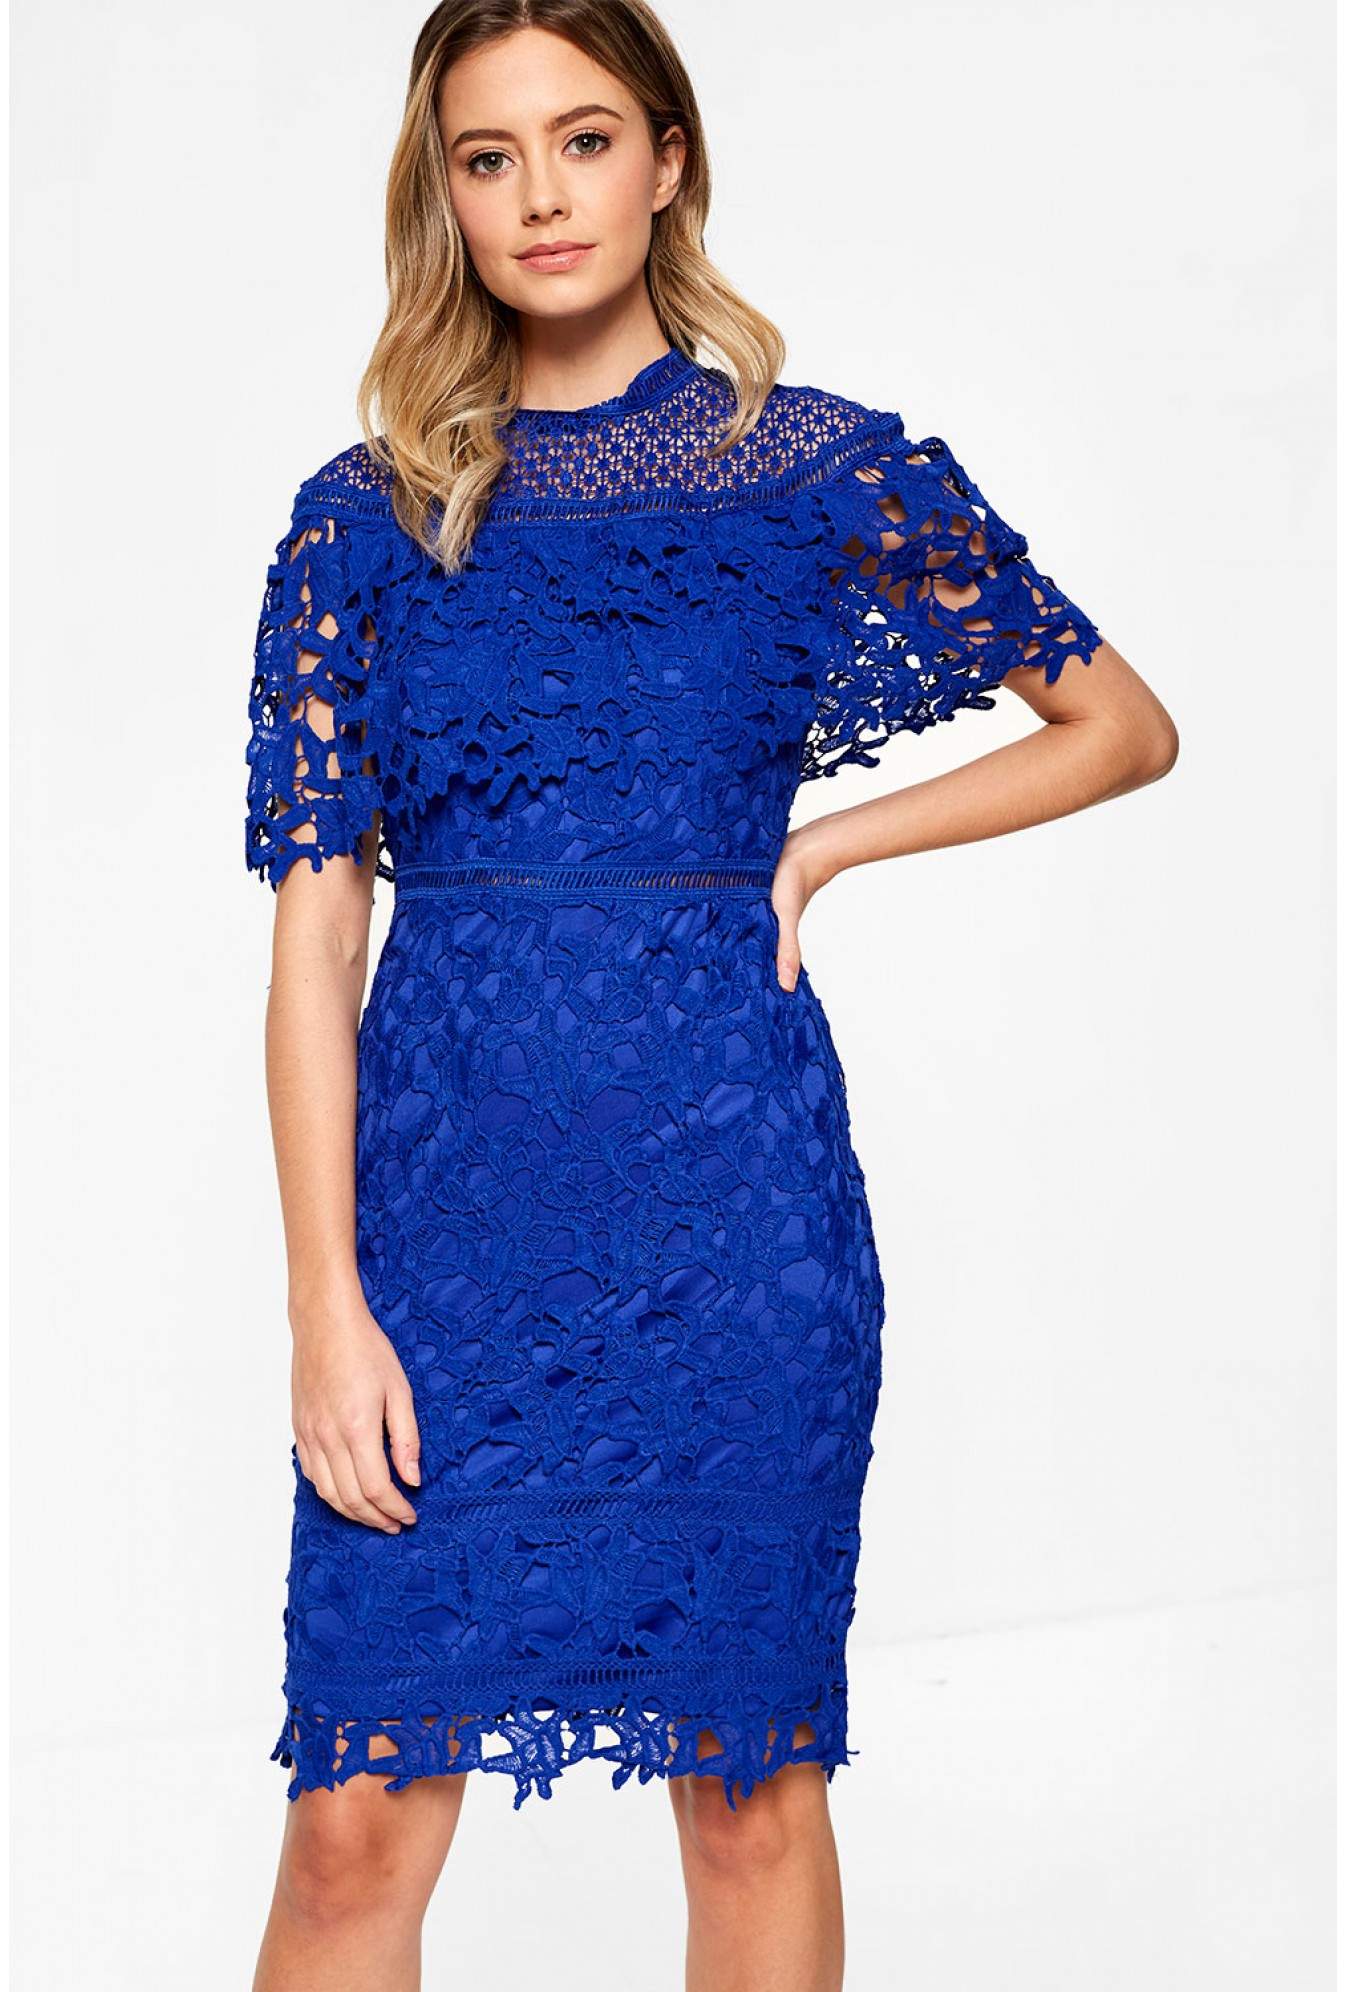 Iclothing Dresses For Weddings Online Sale, UP TO 8 OFF